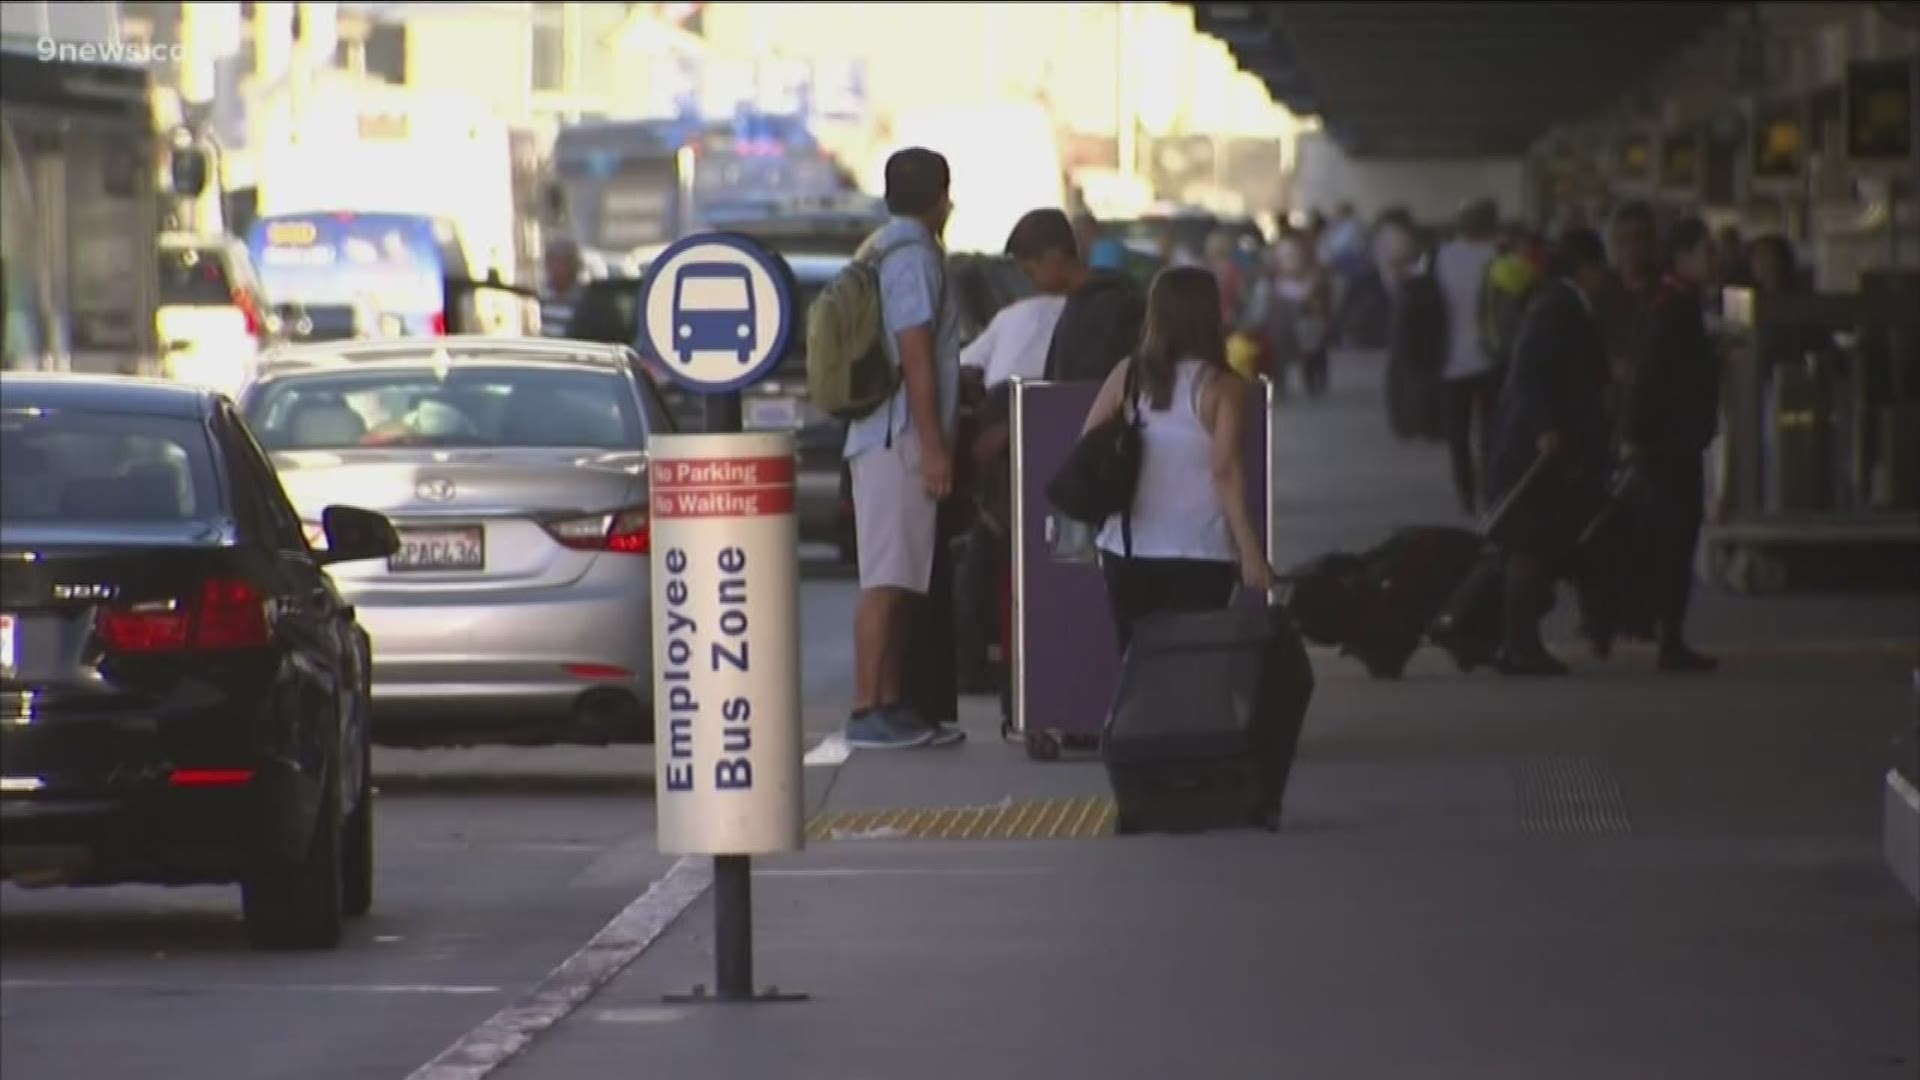 Health departments in Denver and Los Angeles are warning people who may have been at those airports last Wednesday to keep an eye out for symptoms.